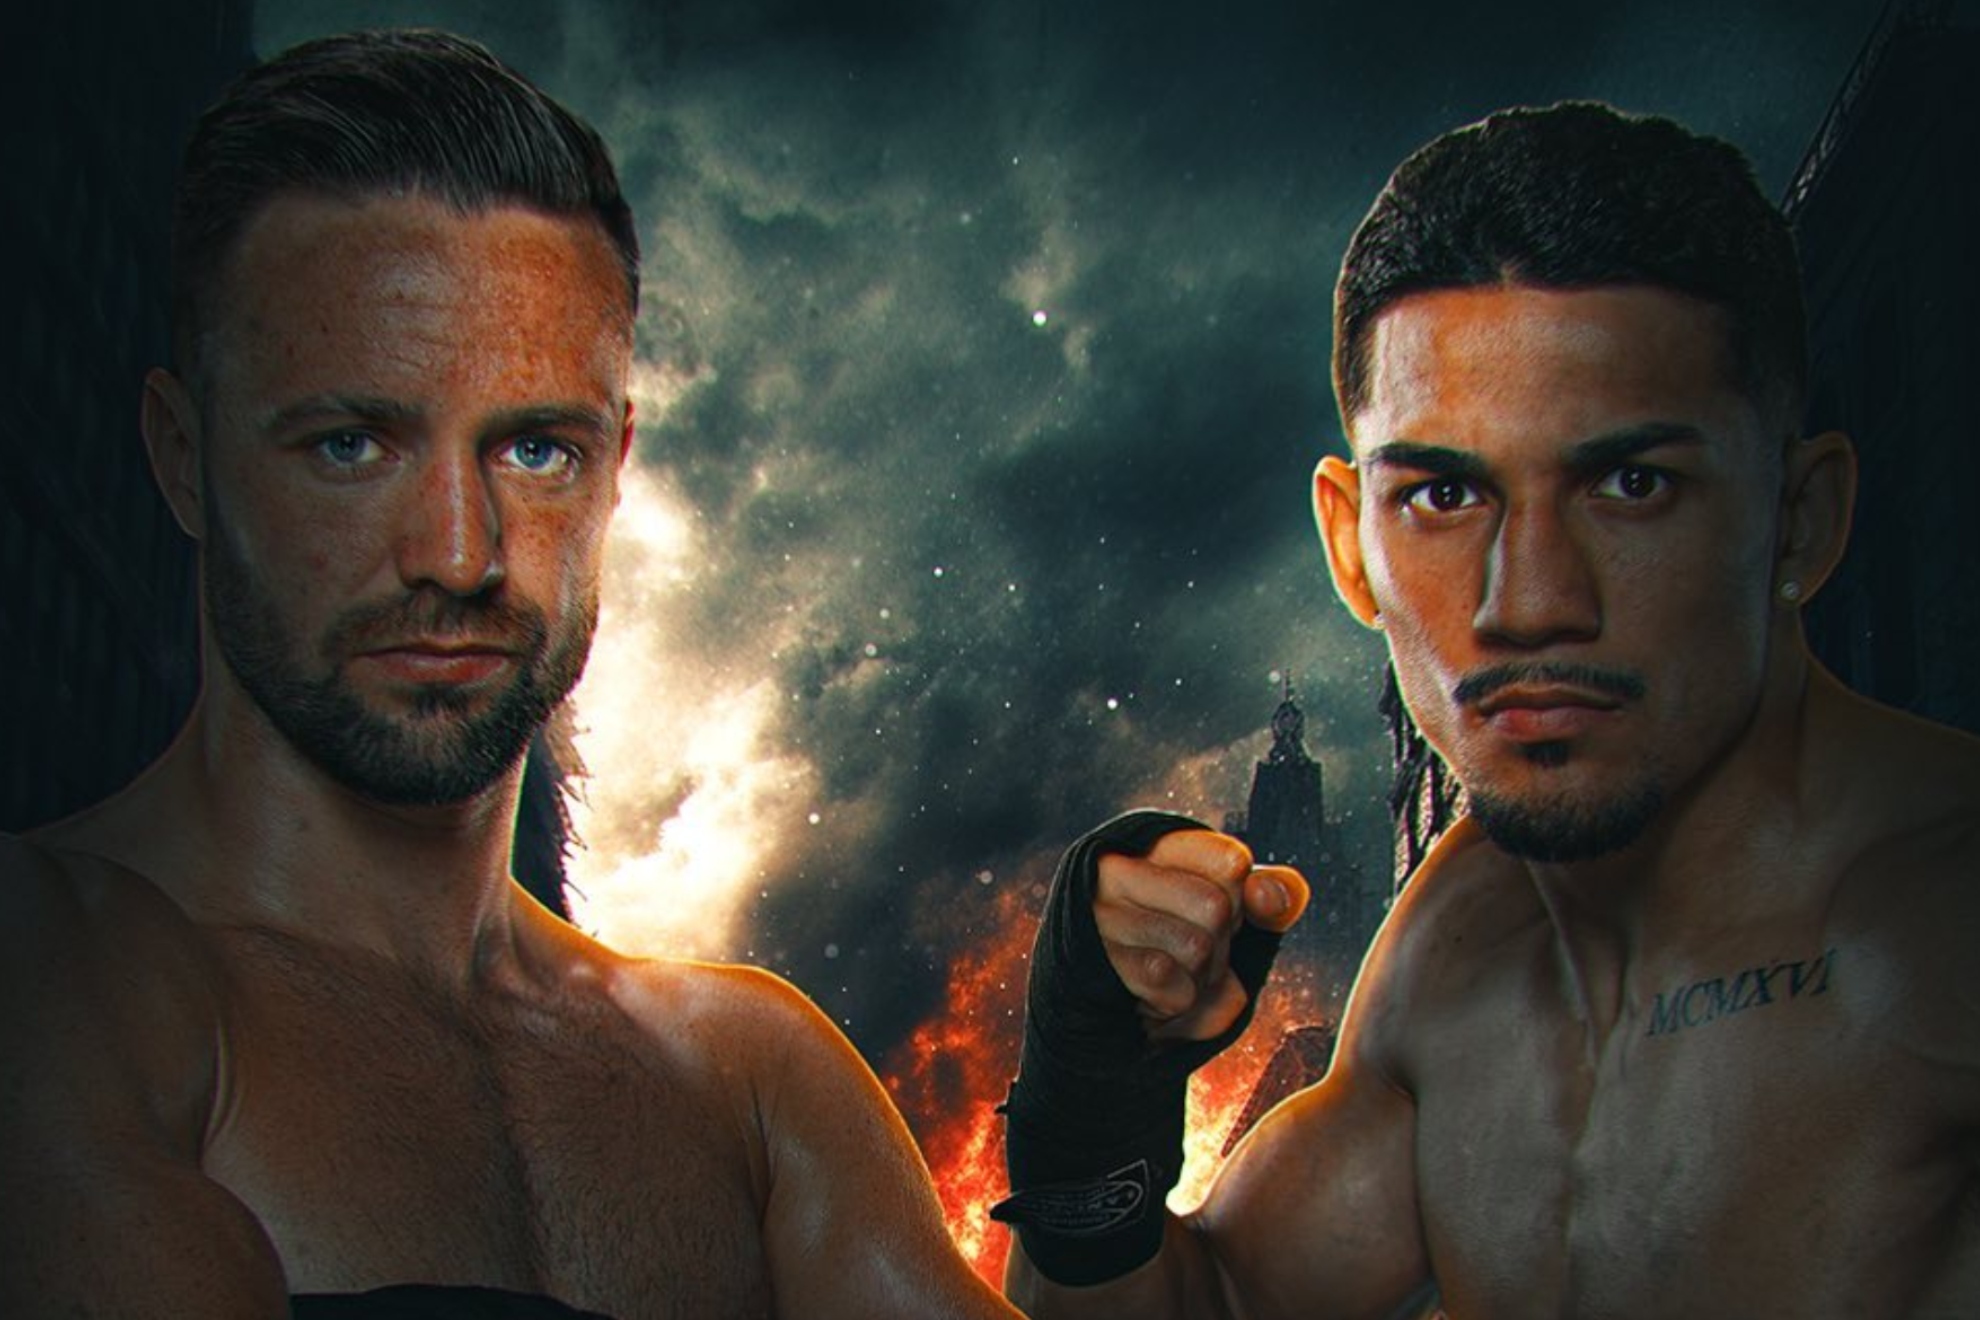 Josh Taylor vs Teofimo López Jr: Date, time, and schedule for this weekend's fight